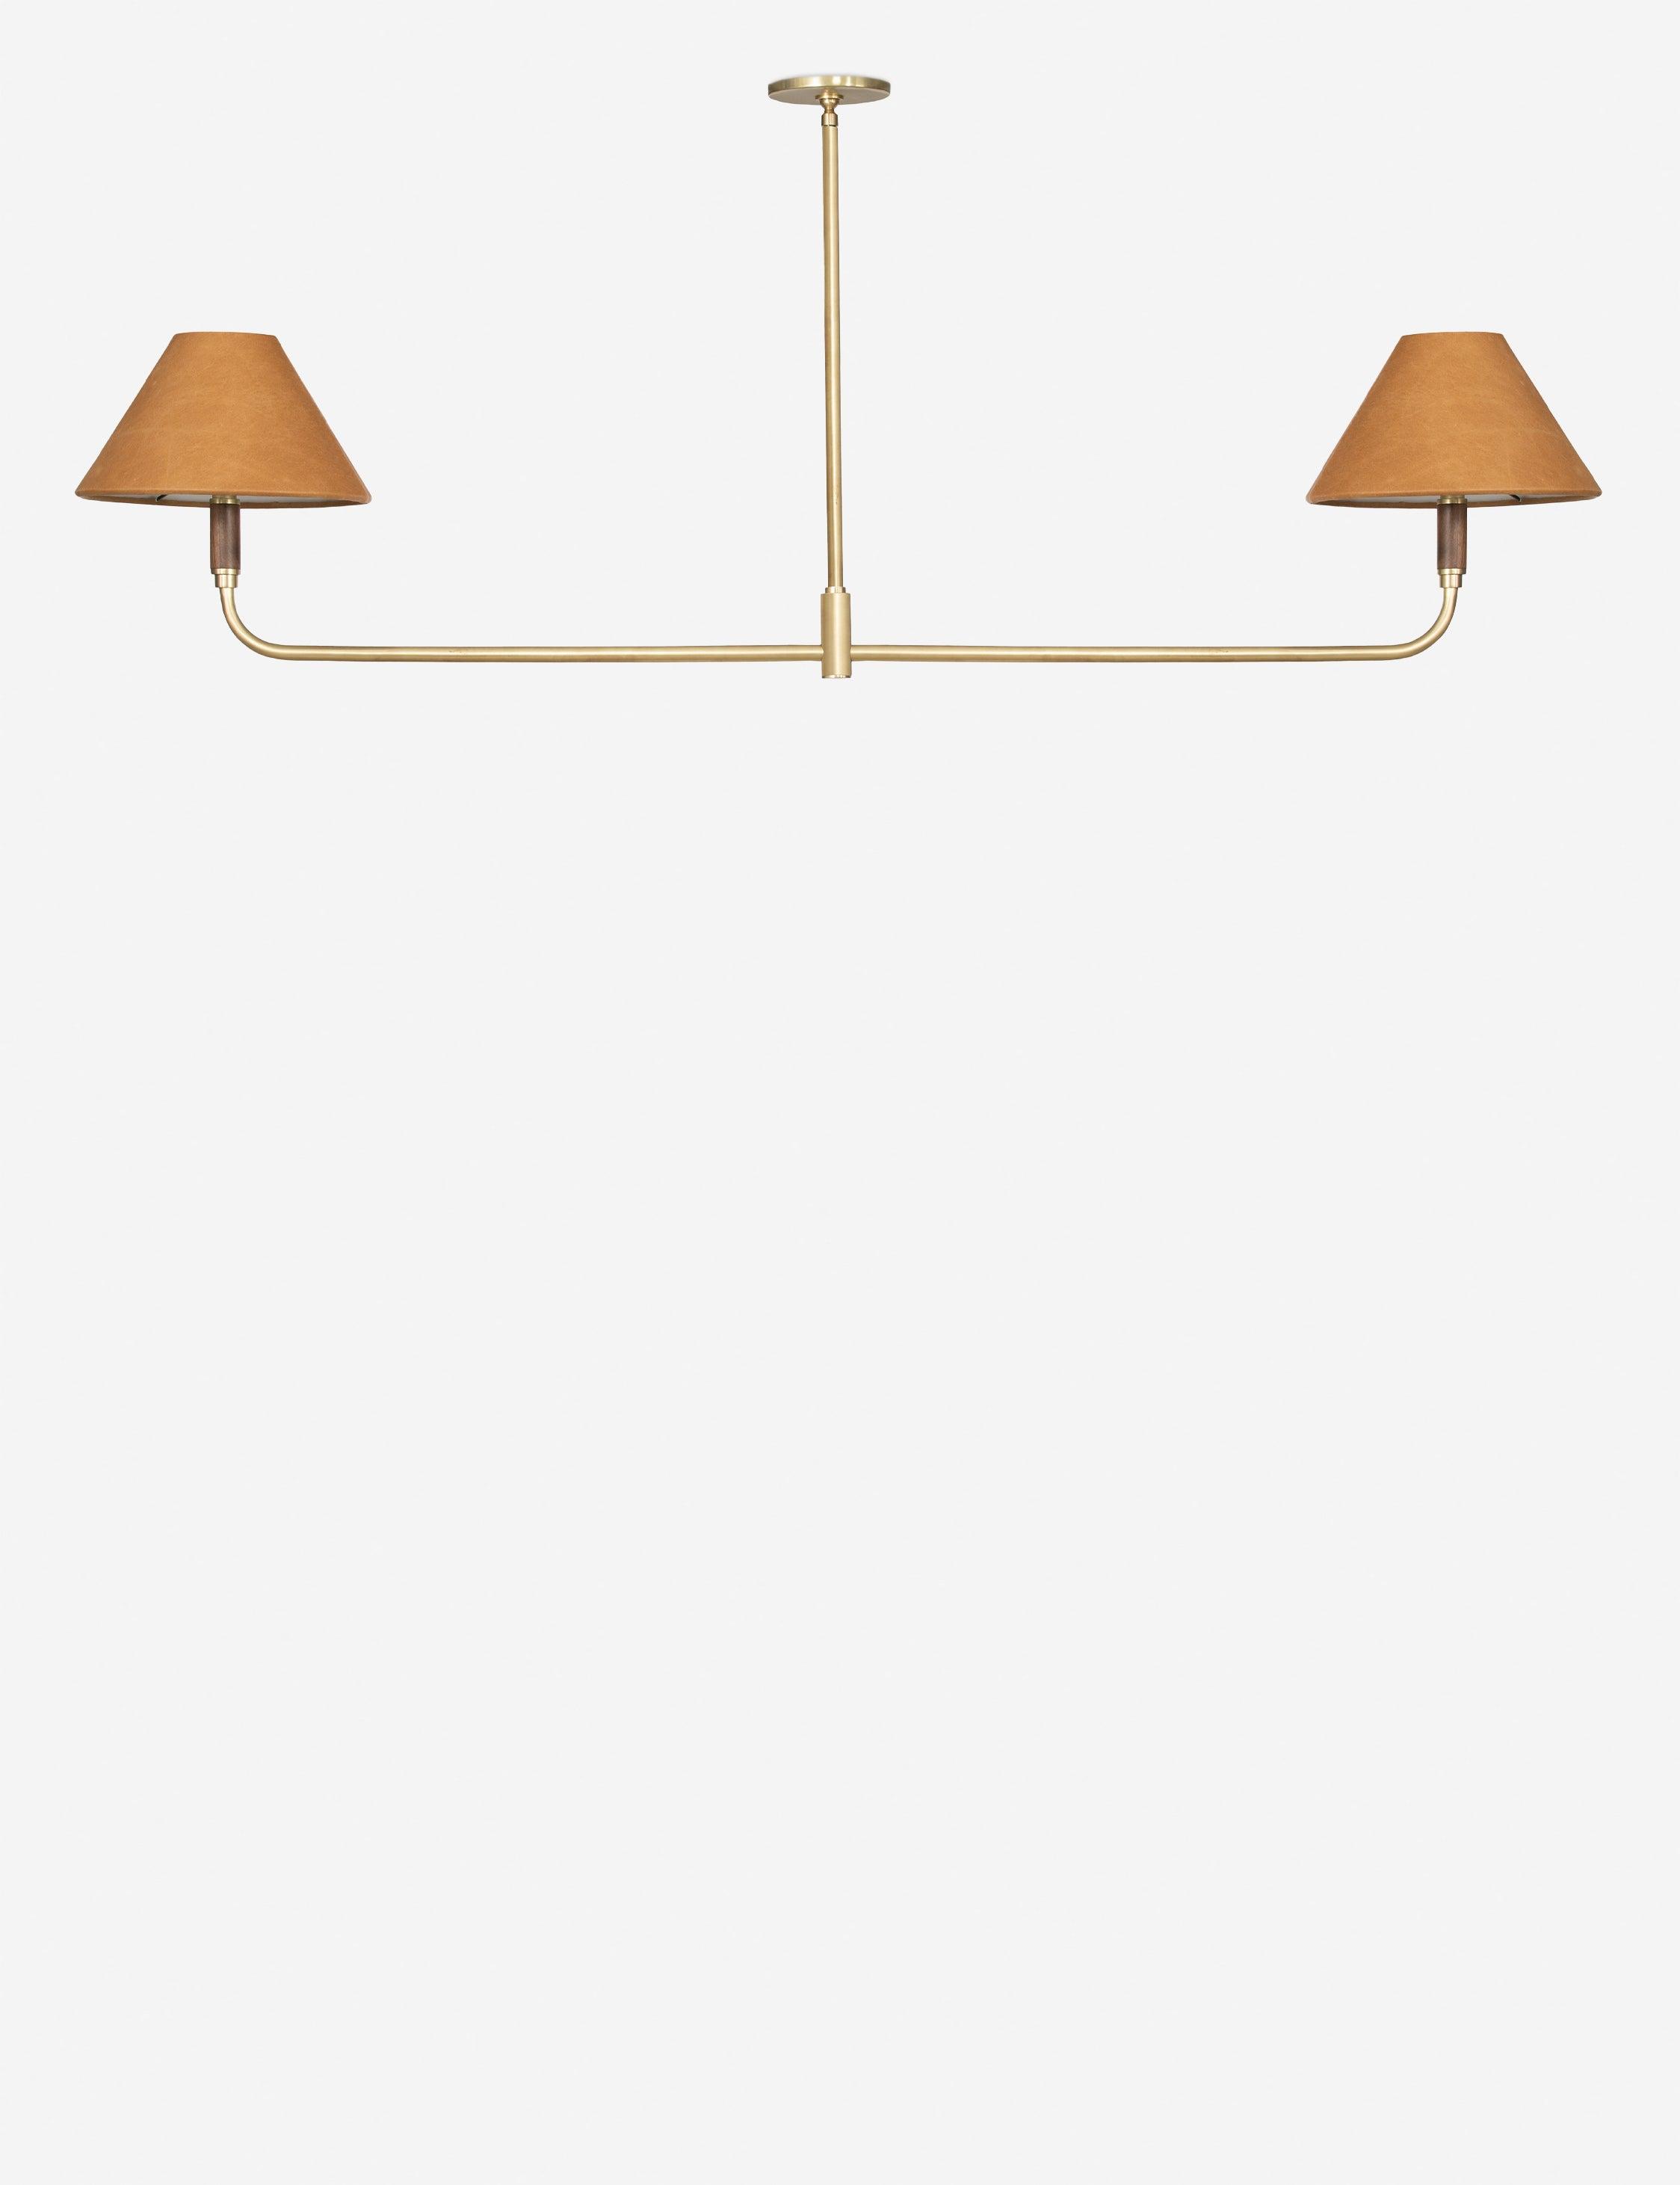 Cullen Aged Brass 2-Light LED Island Pendant with Walnut and Leather Accents